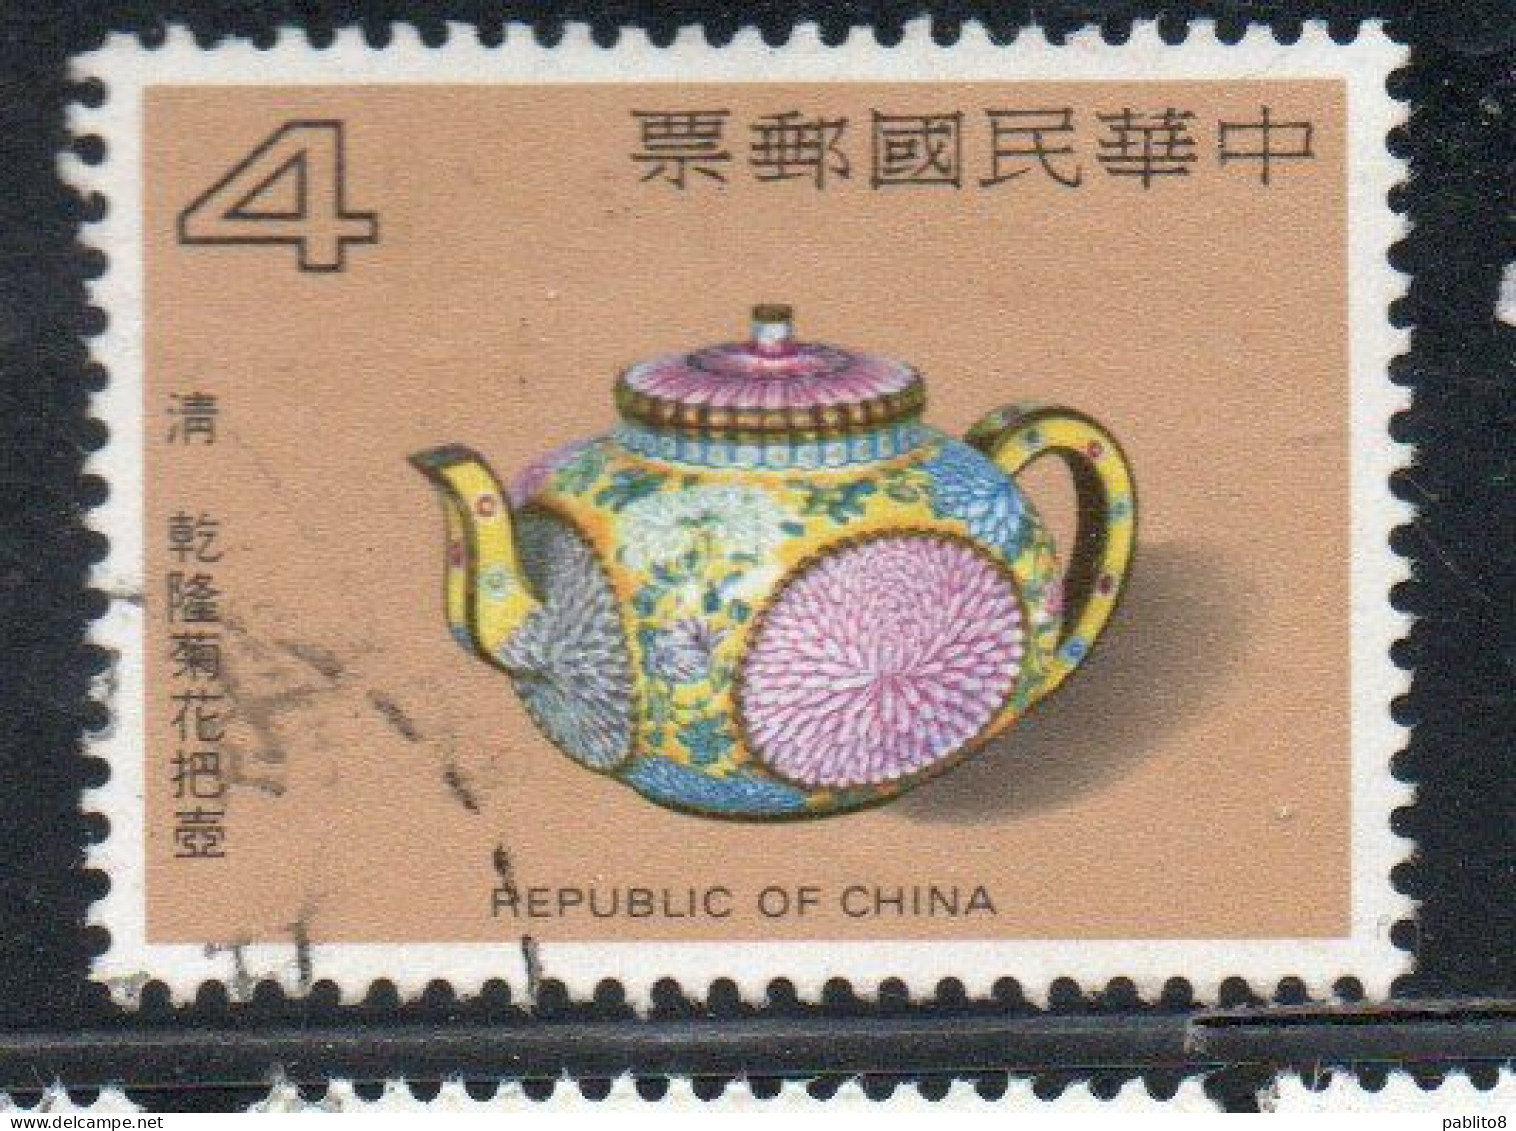 CHINA REPUBLIC CINA TAIWAN FORMOSA 1984 CH'ING DYNASTY ENAMELWARE TEAPOT 4$ USED USATO OBLITERE' - Usados